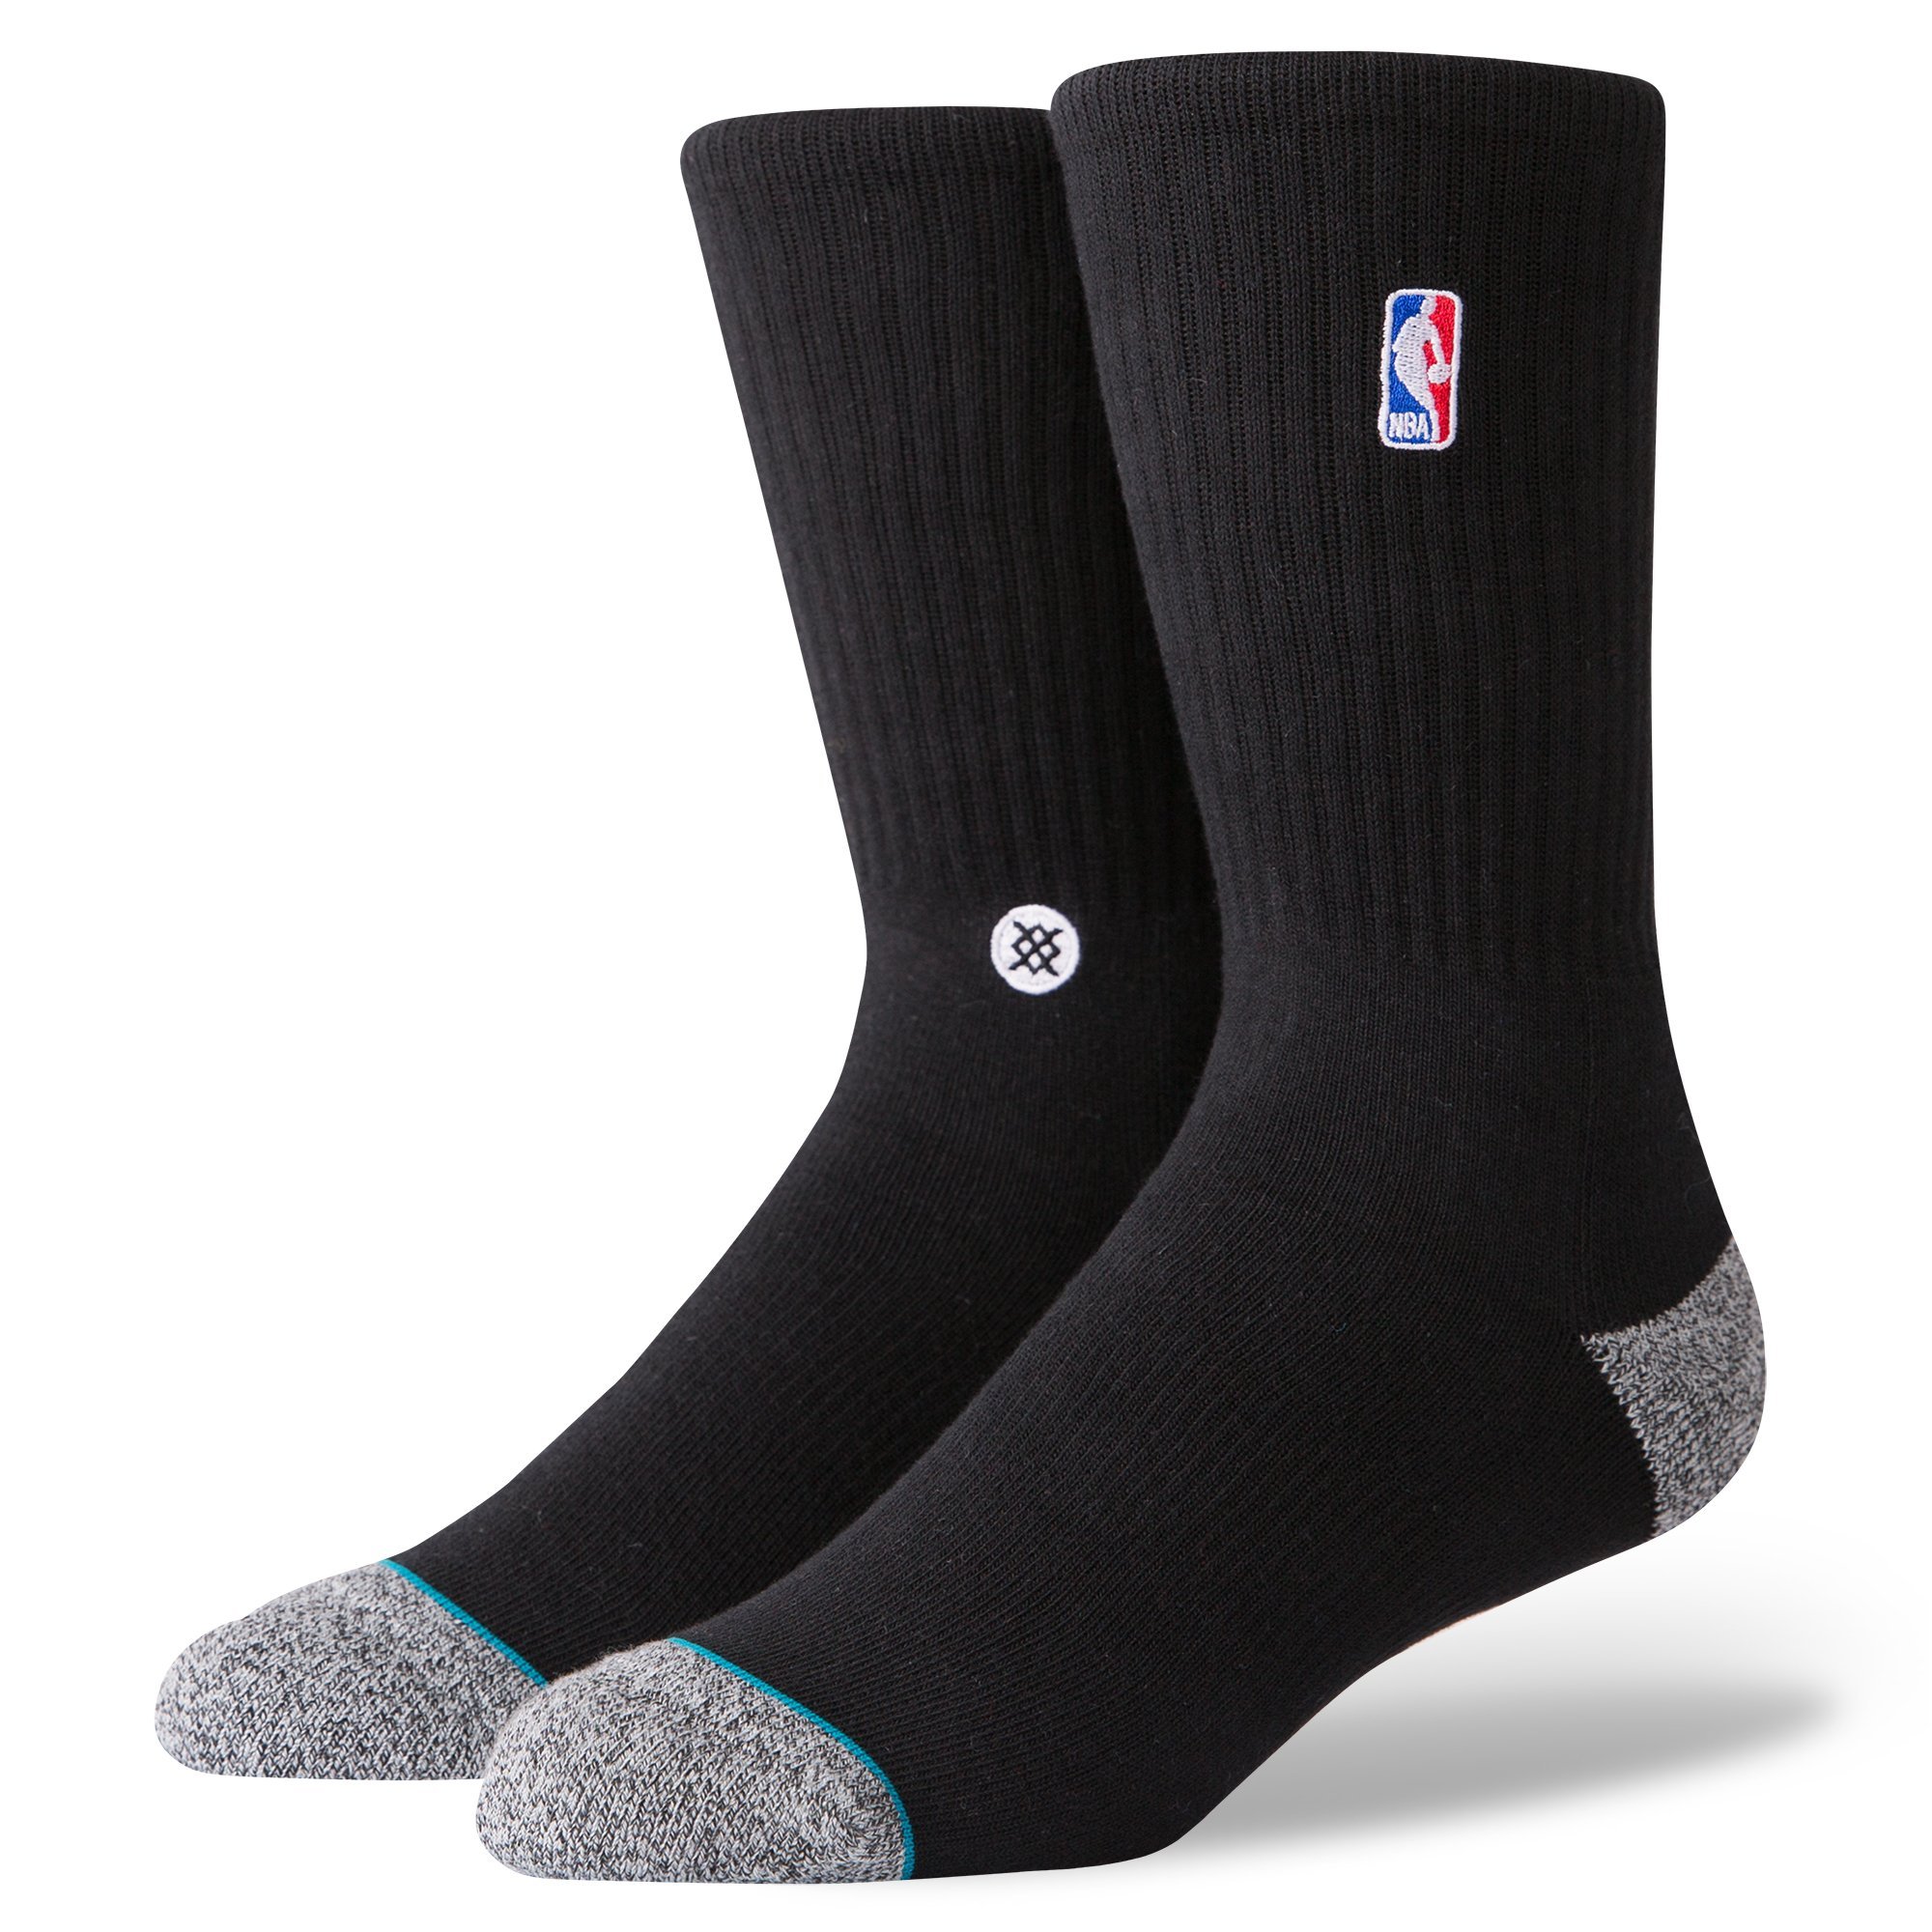 the-best-basketball-socks-stance-crew | Shoes For Hire